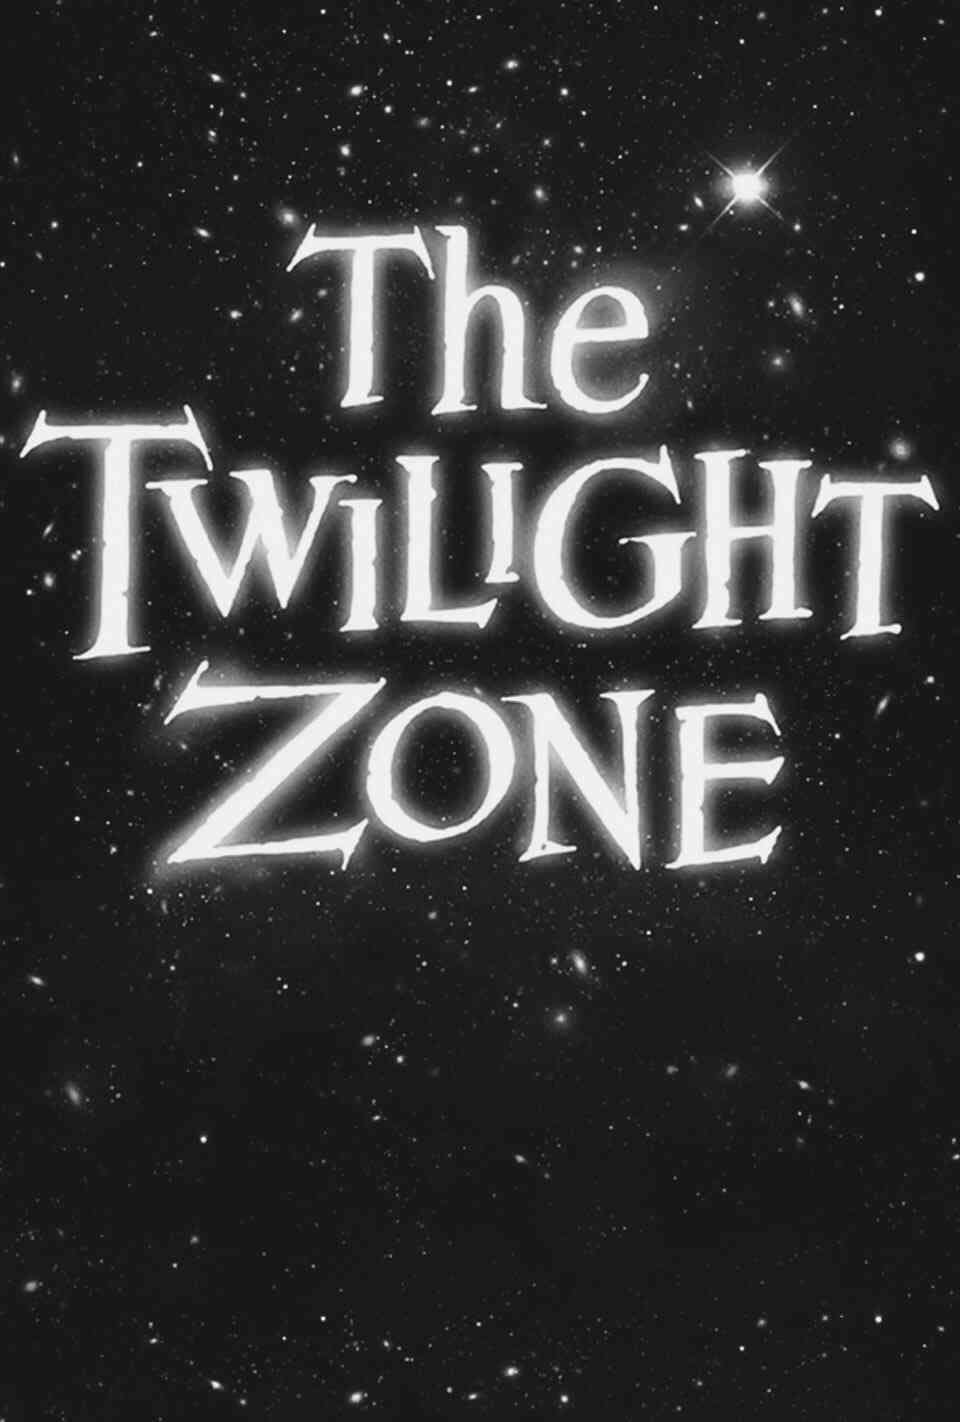 Read The Twilight Zone screenplay (poster)